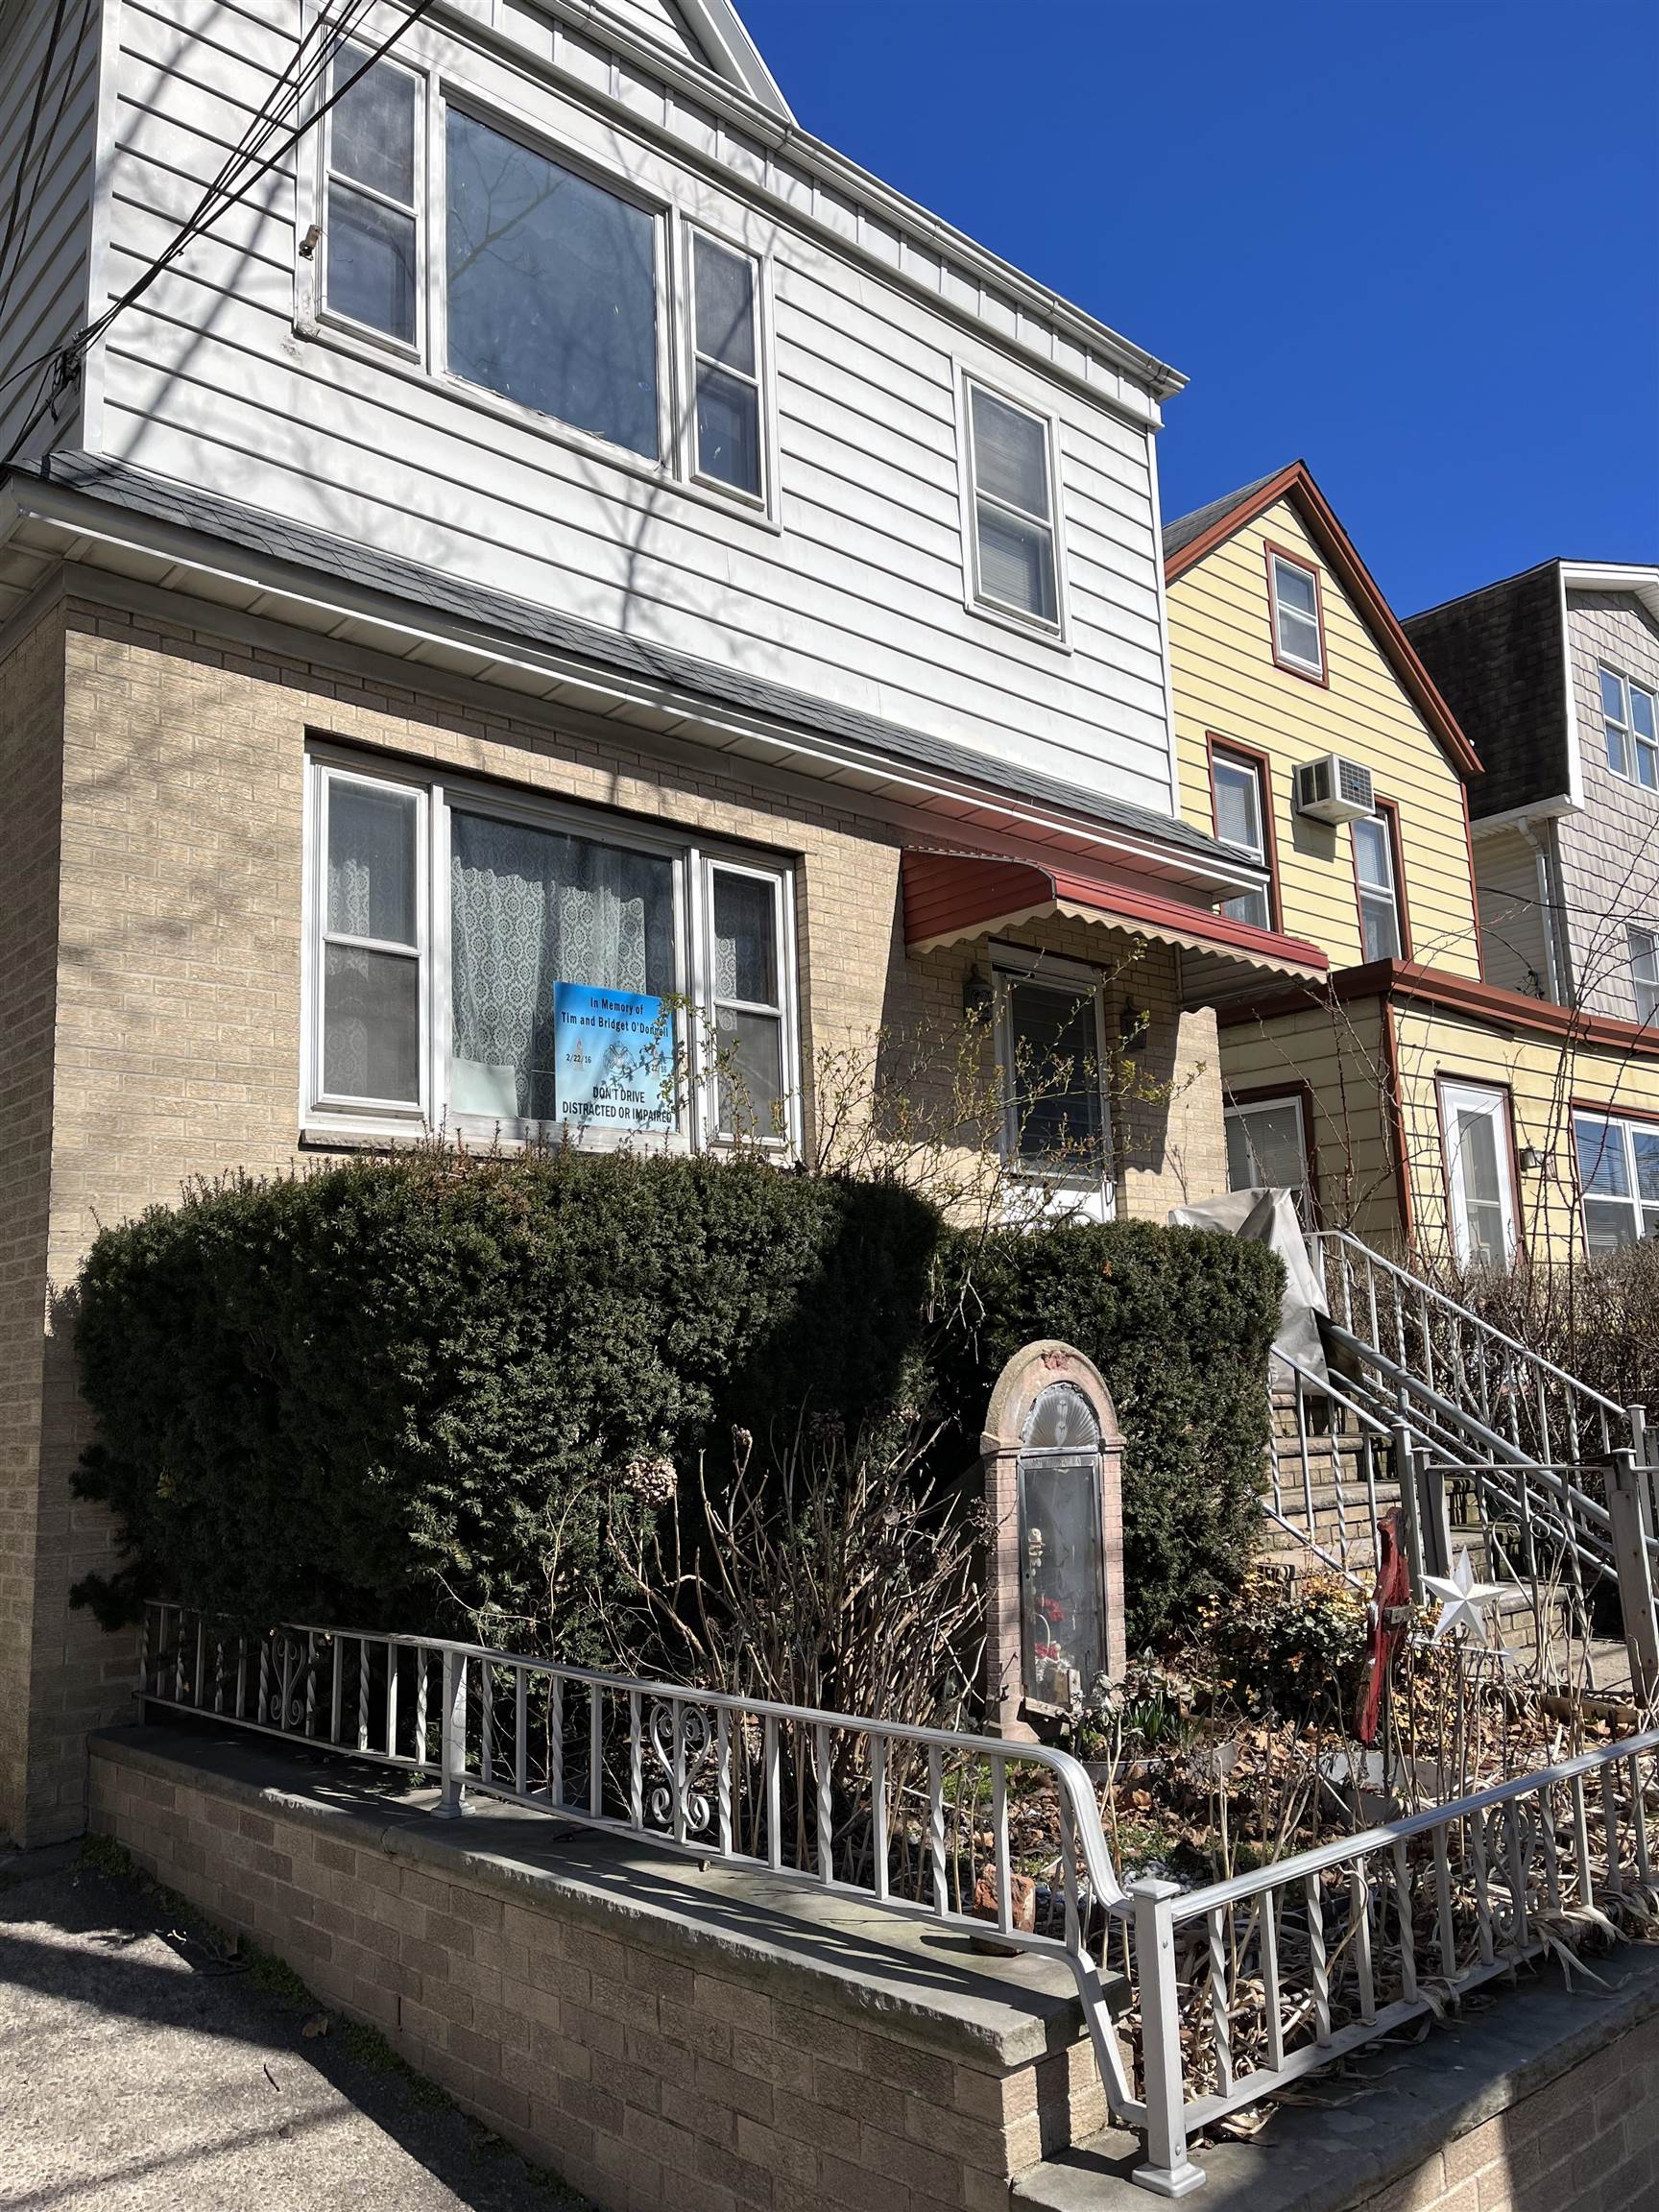 # 230003690 - For Rent in Bayonne NJ